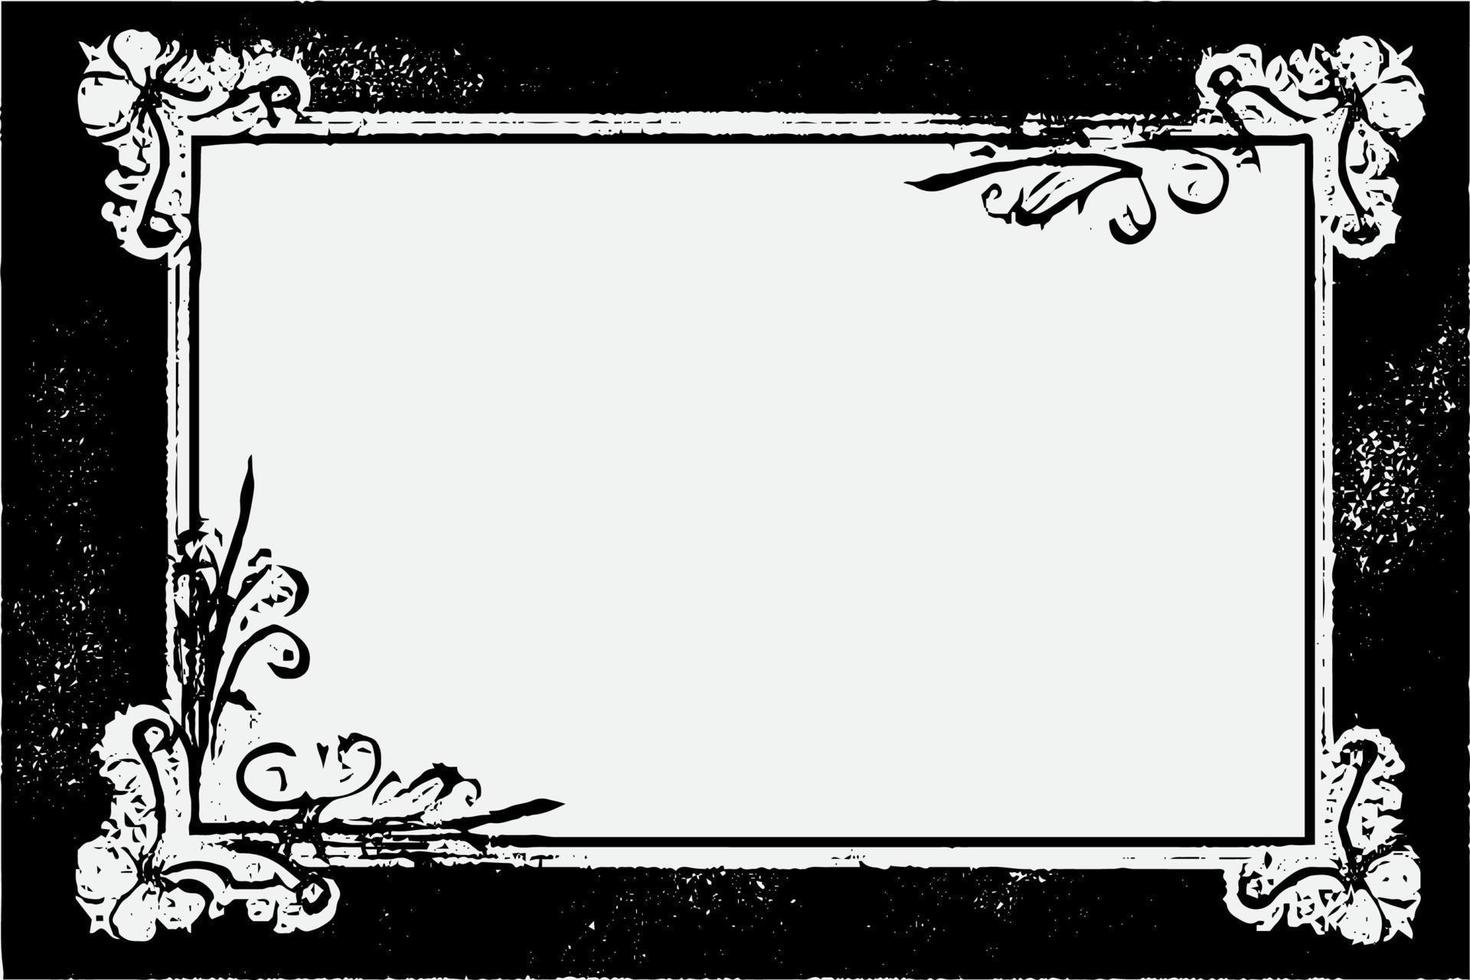 square frame with Grunge black ink ornament around the edges, white background in vector EPS format B